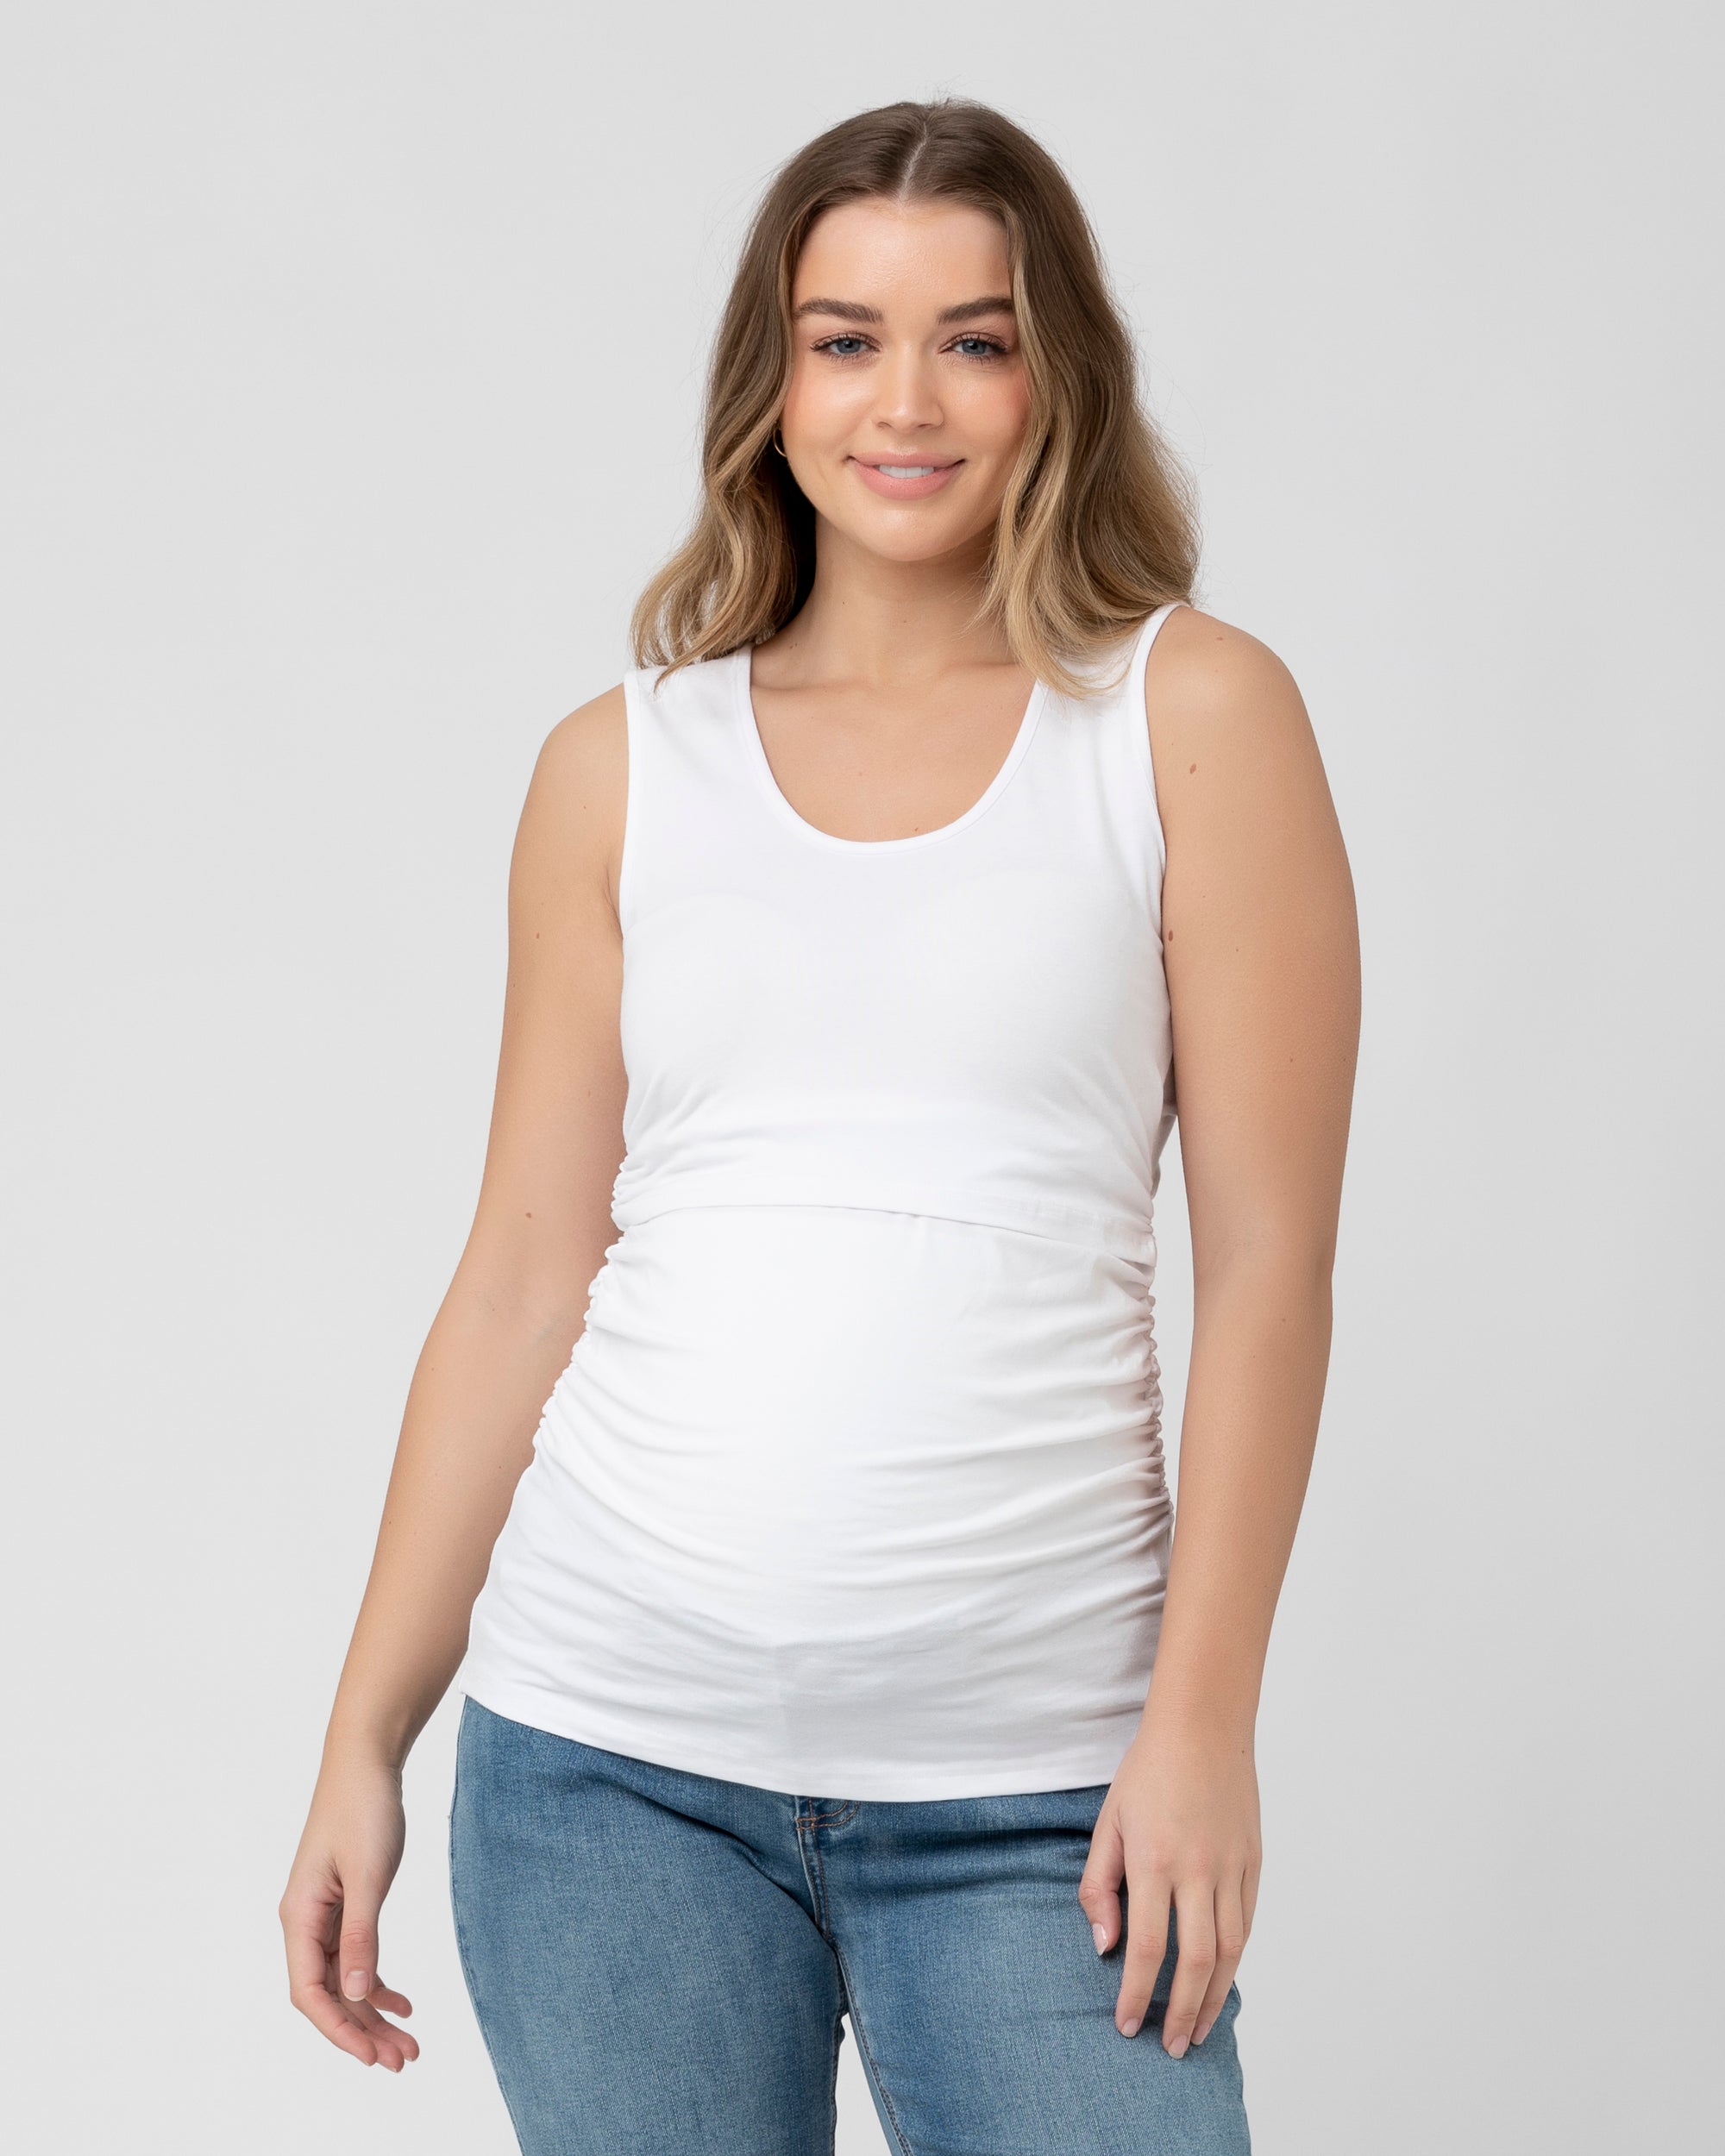 White Maternity Tank Tops - Soft & Stylish Tops for Mums-to-Be